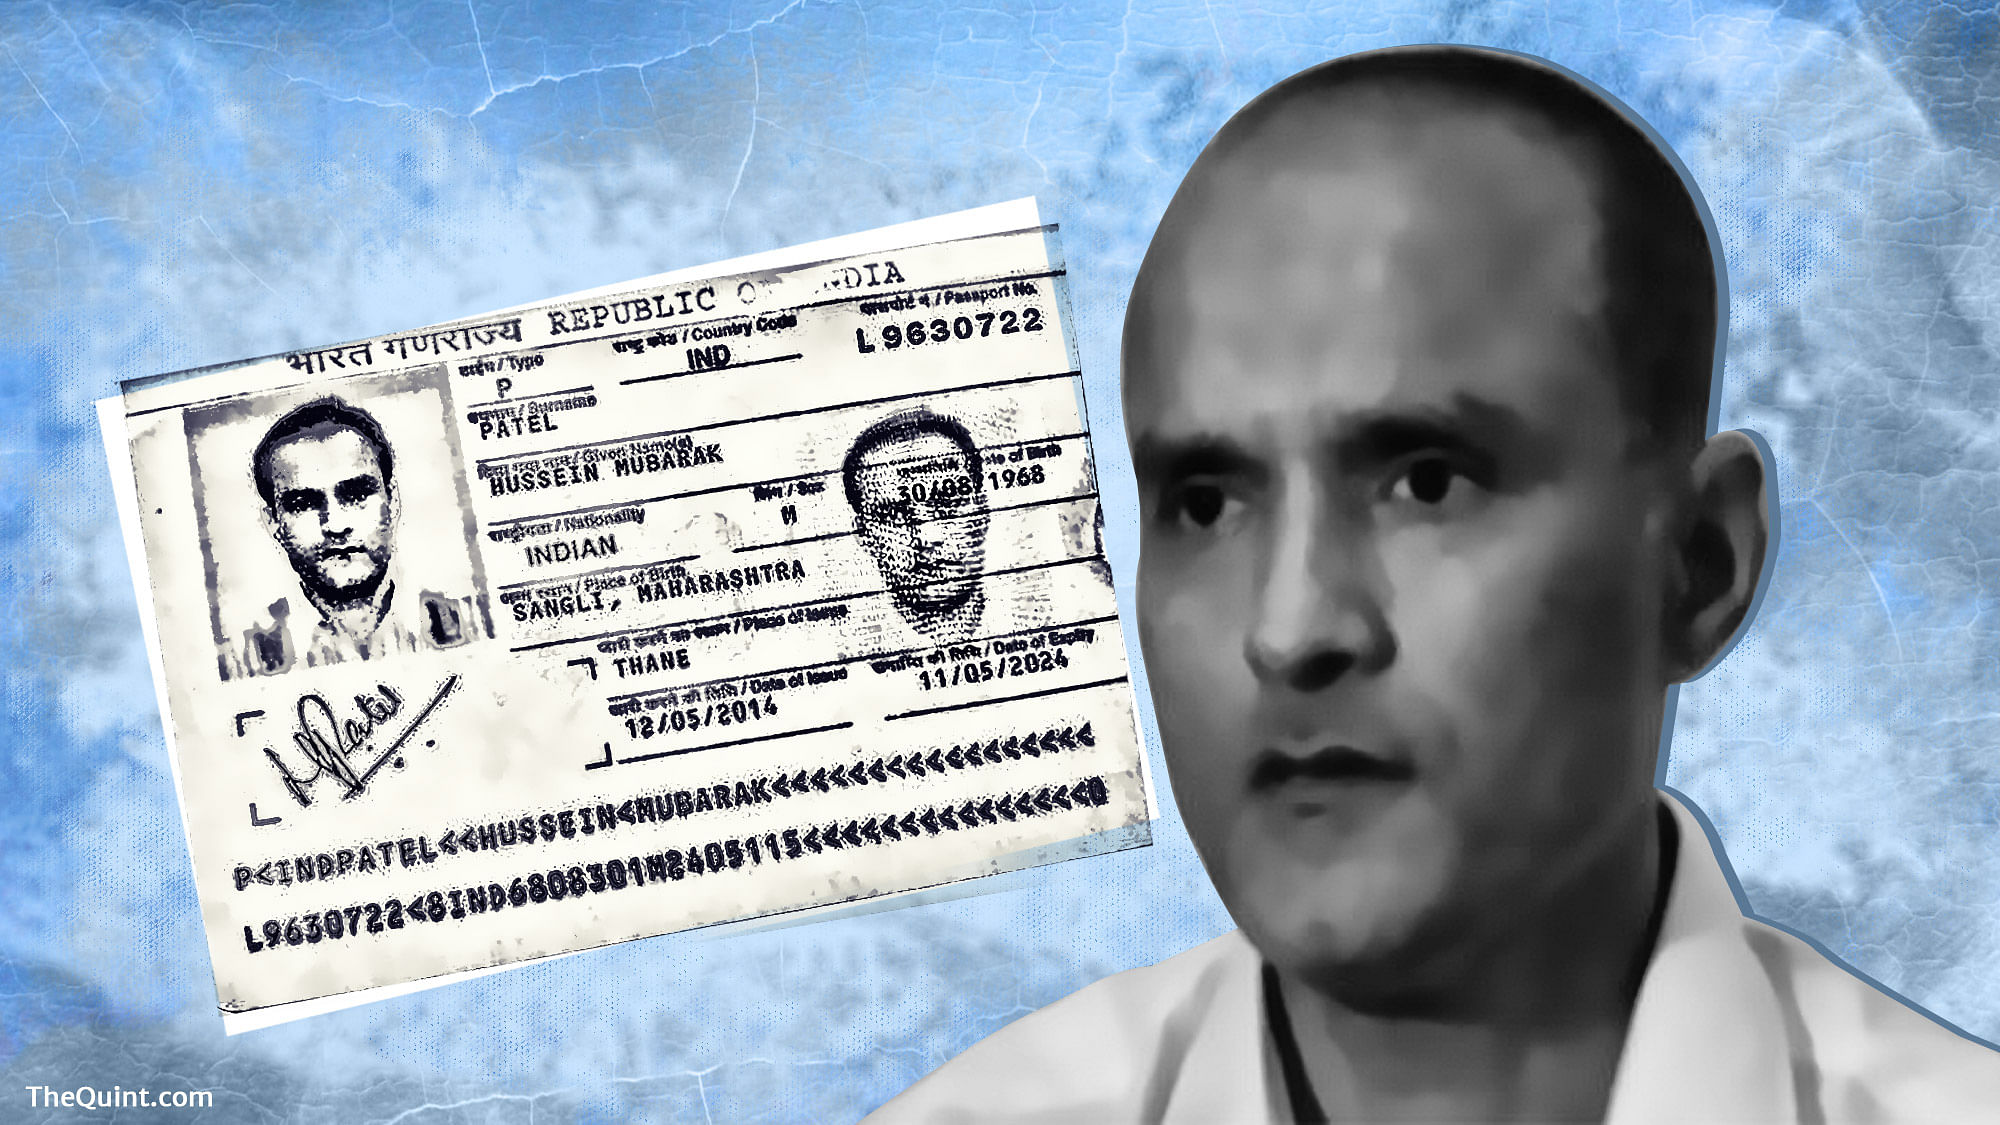 Kulbhushan Jadhav, who Islamabad claimed is an Indian spy, was handed the death sentence by a Pakistani military court in April this year. (Photo: <b>The Quint</b>)